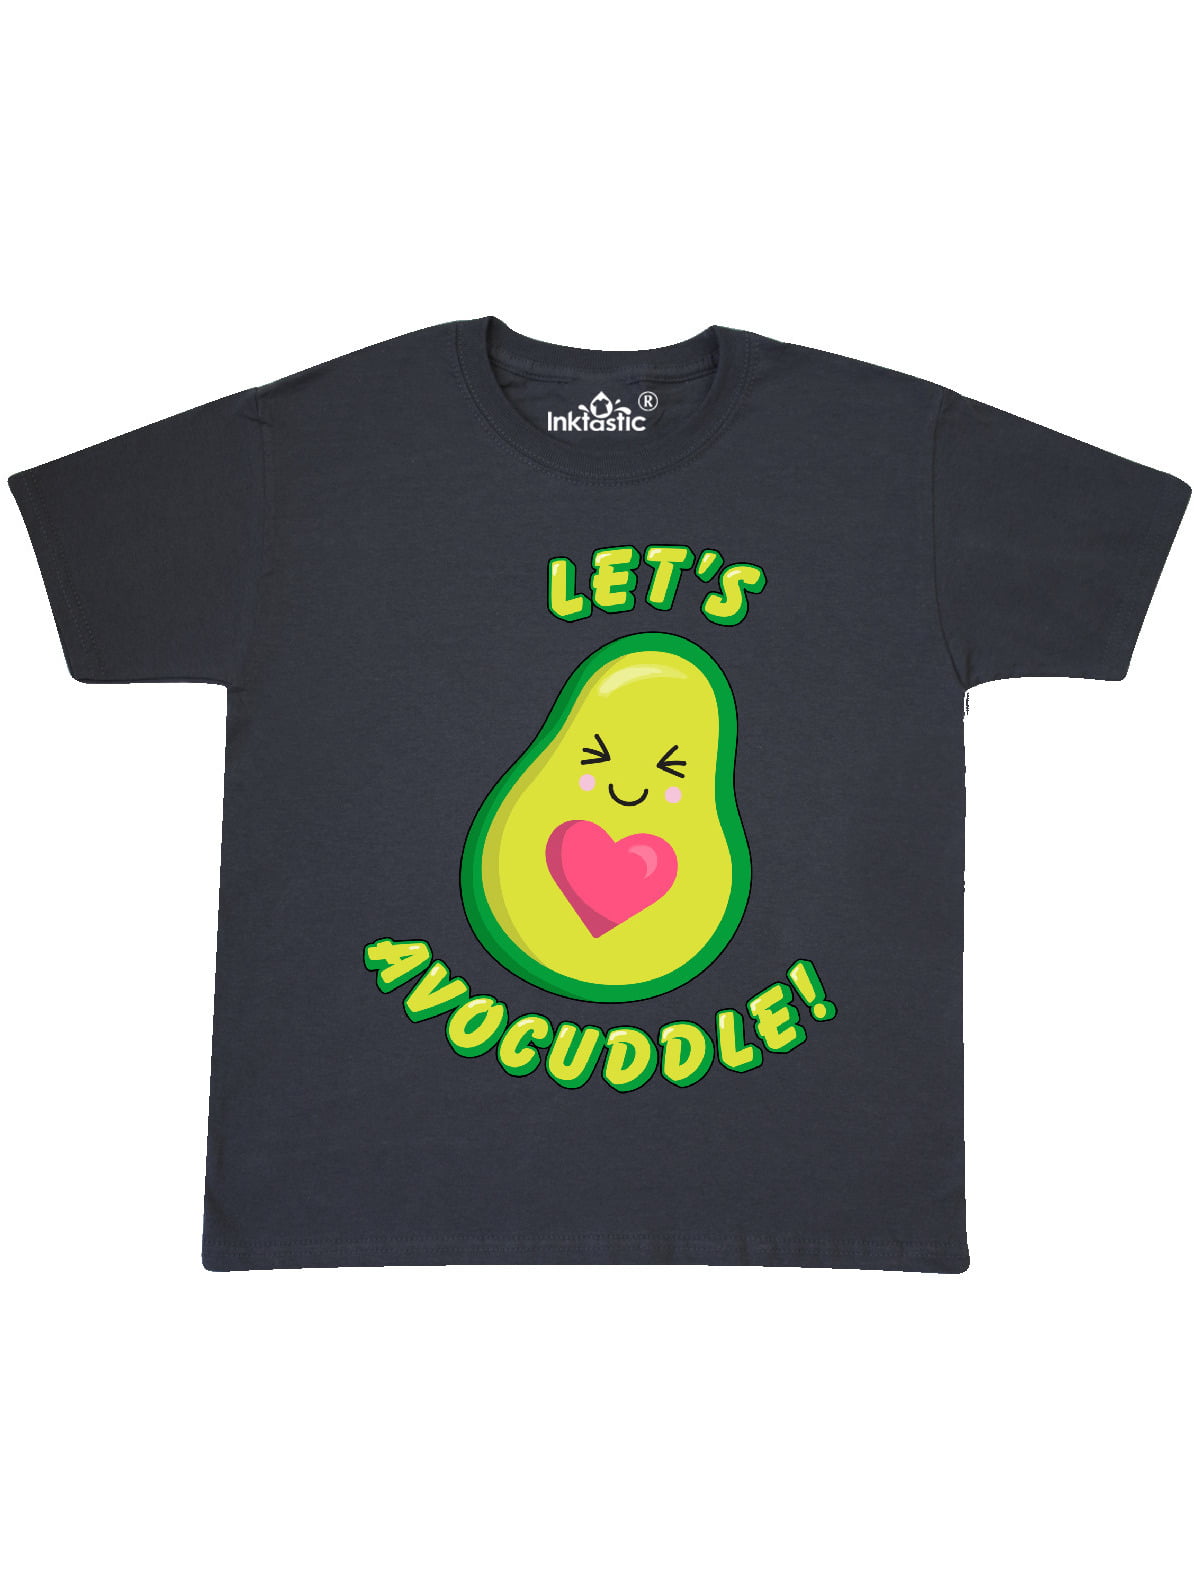 Let's Avocuddle Cute Avocado with Heart Youth T-Shirt - Walmart.com ...